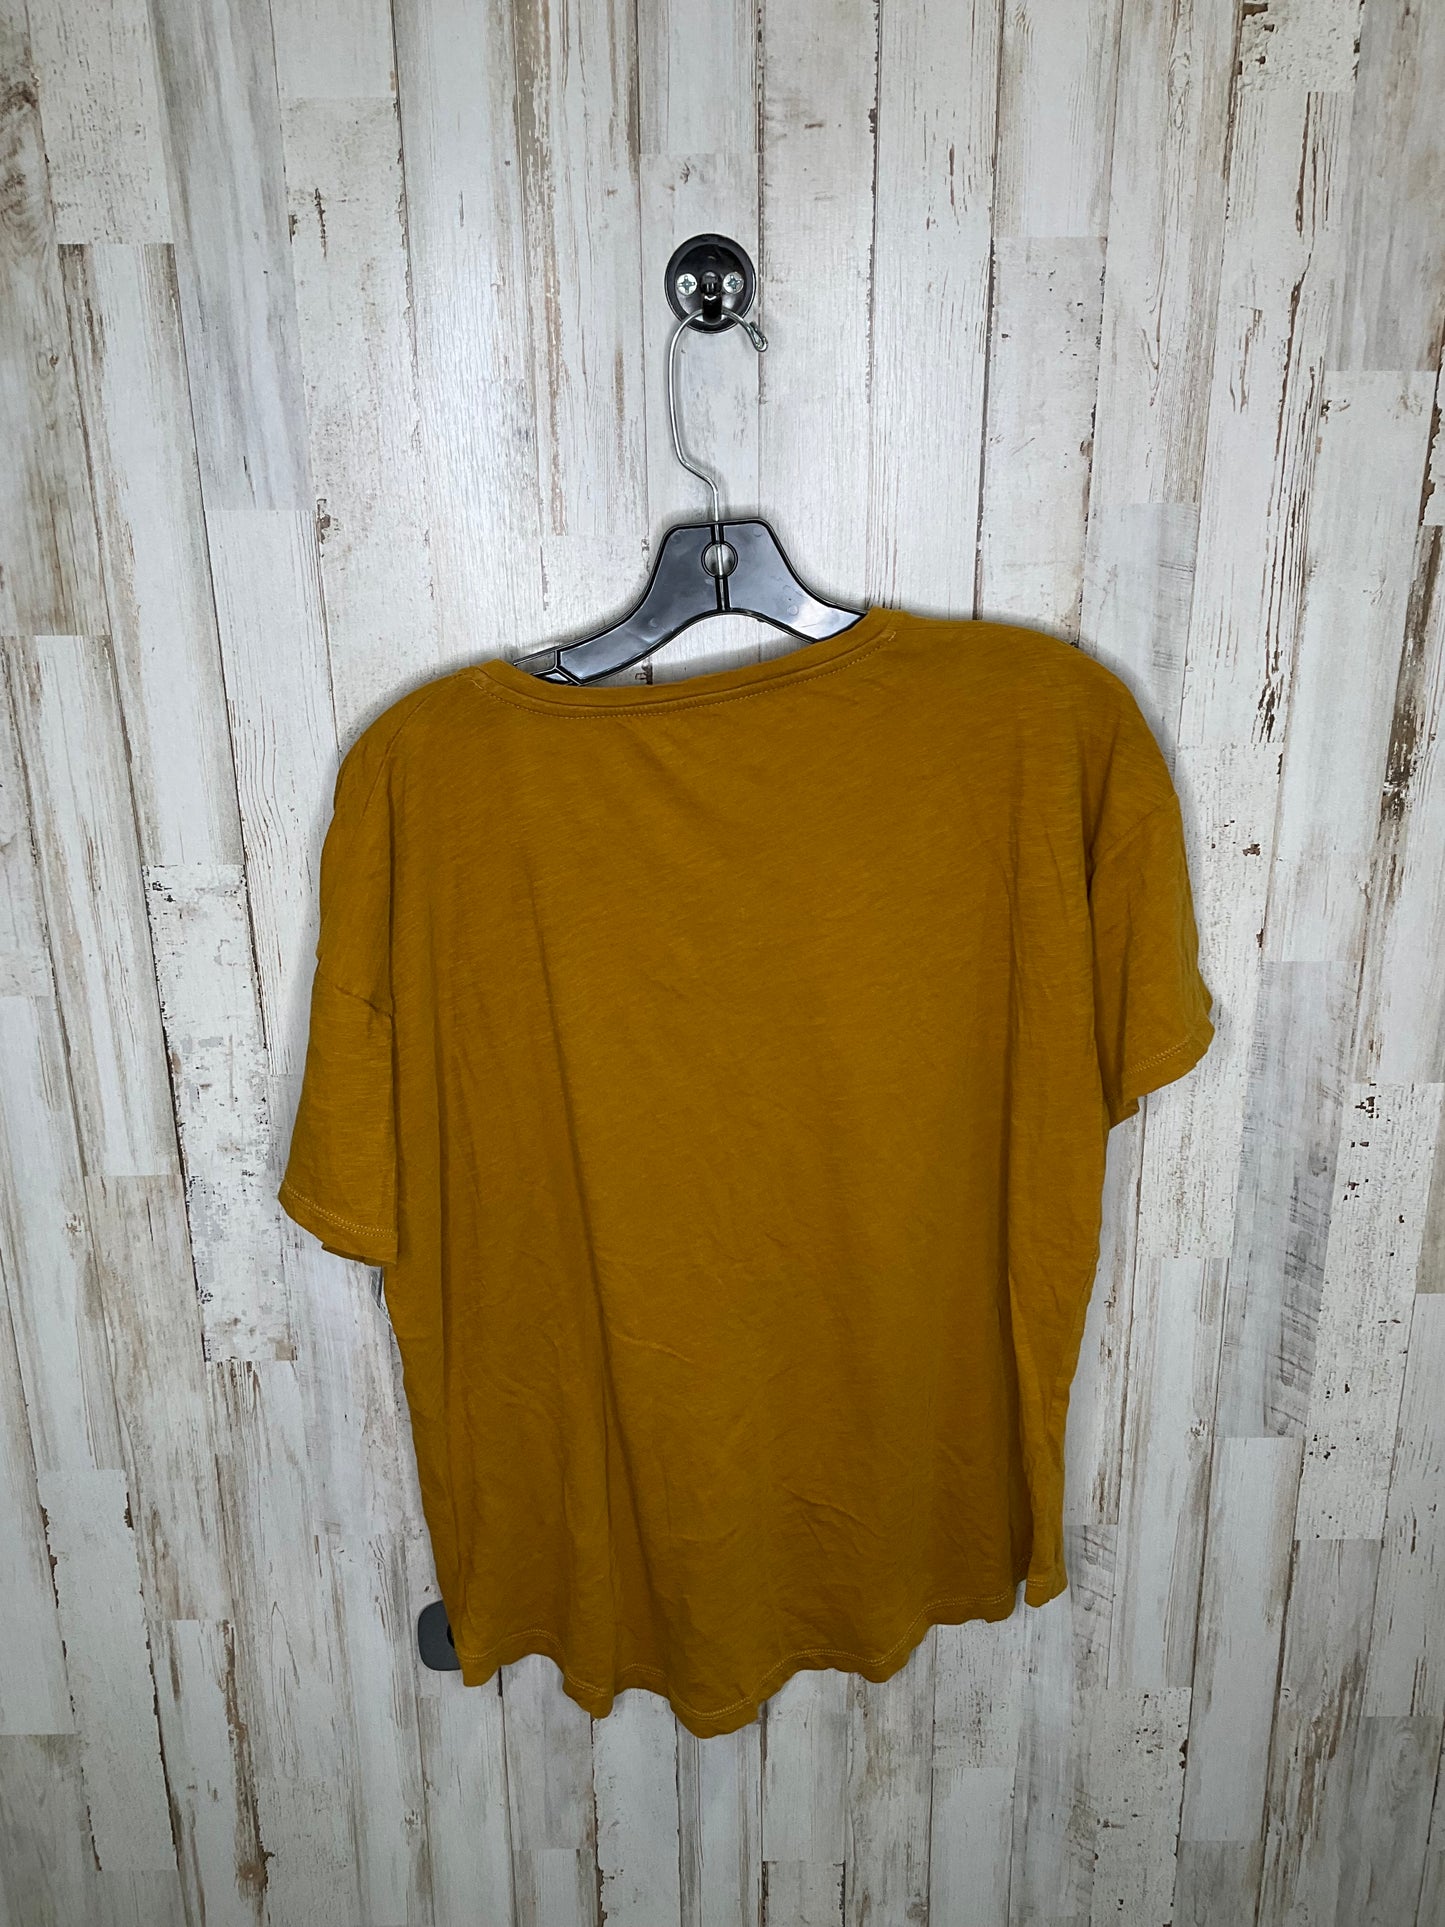 Yellow Top Short Sleeve Madewell, Size Xl